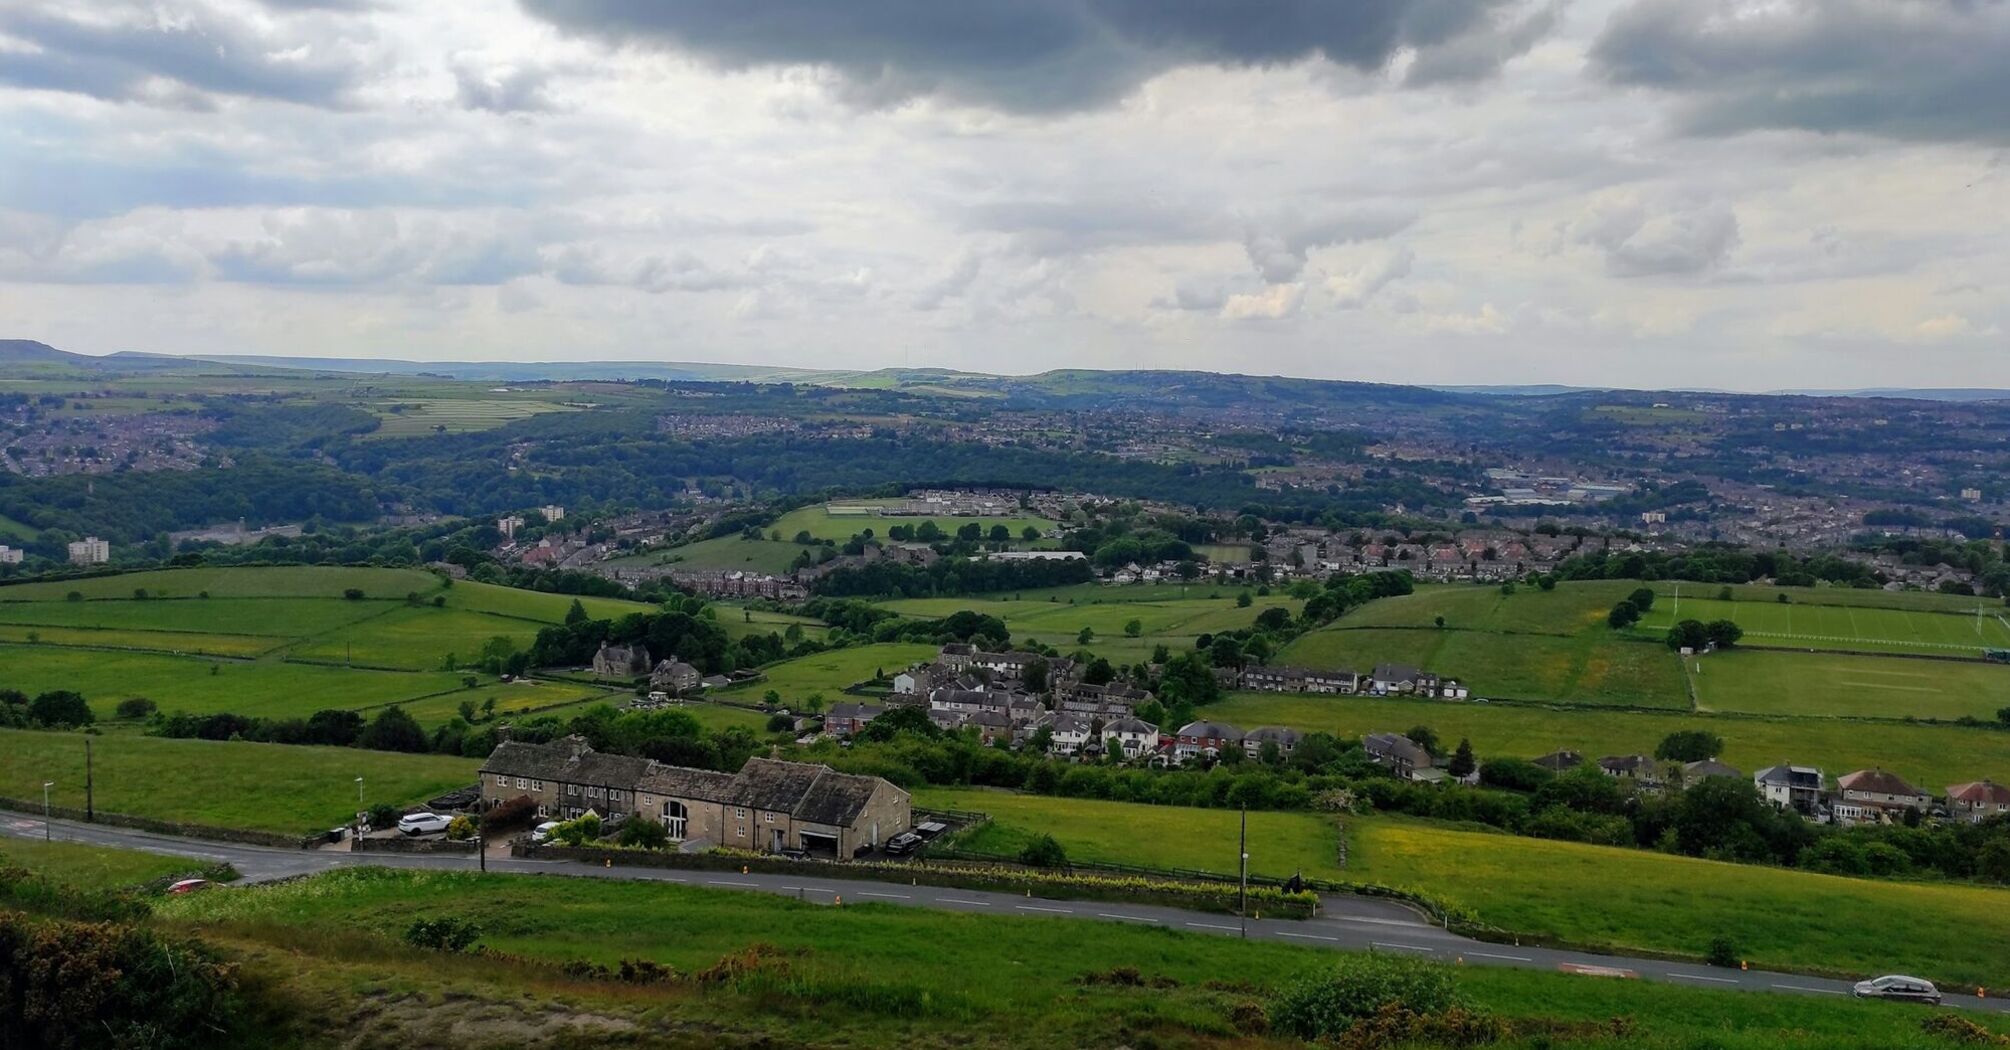 A scenic view of Huddersfield, showcasing lush green fields, rolling hills, and clusters of buildings under a cloudy sky